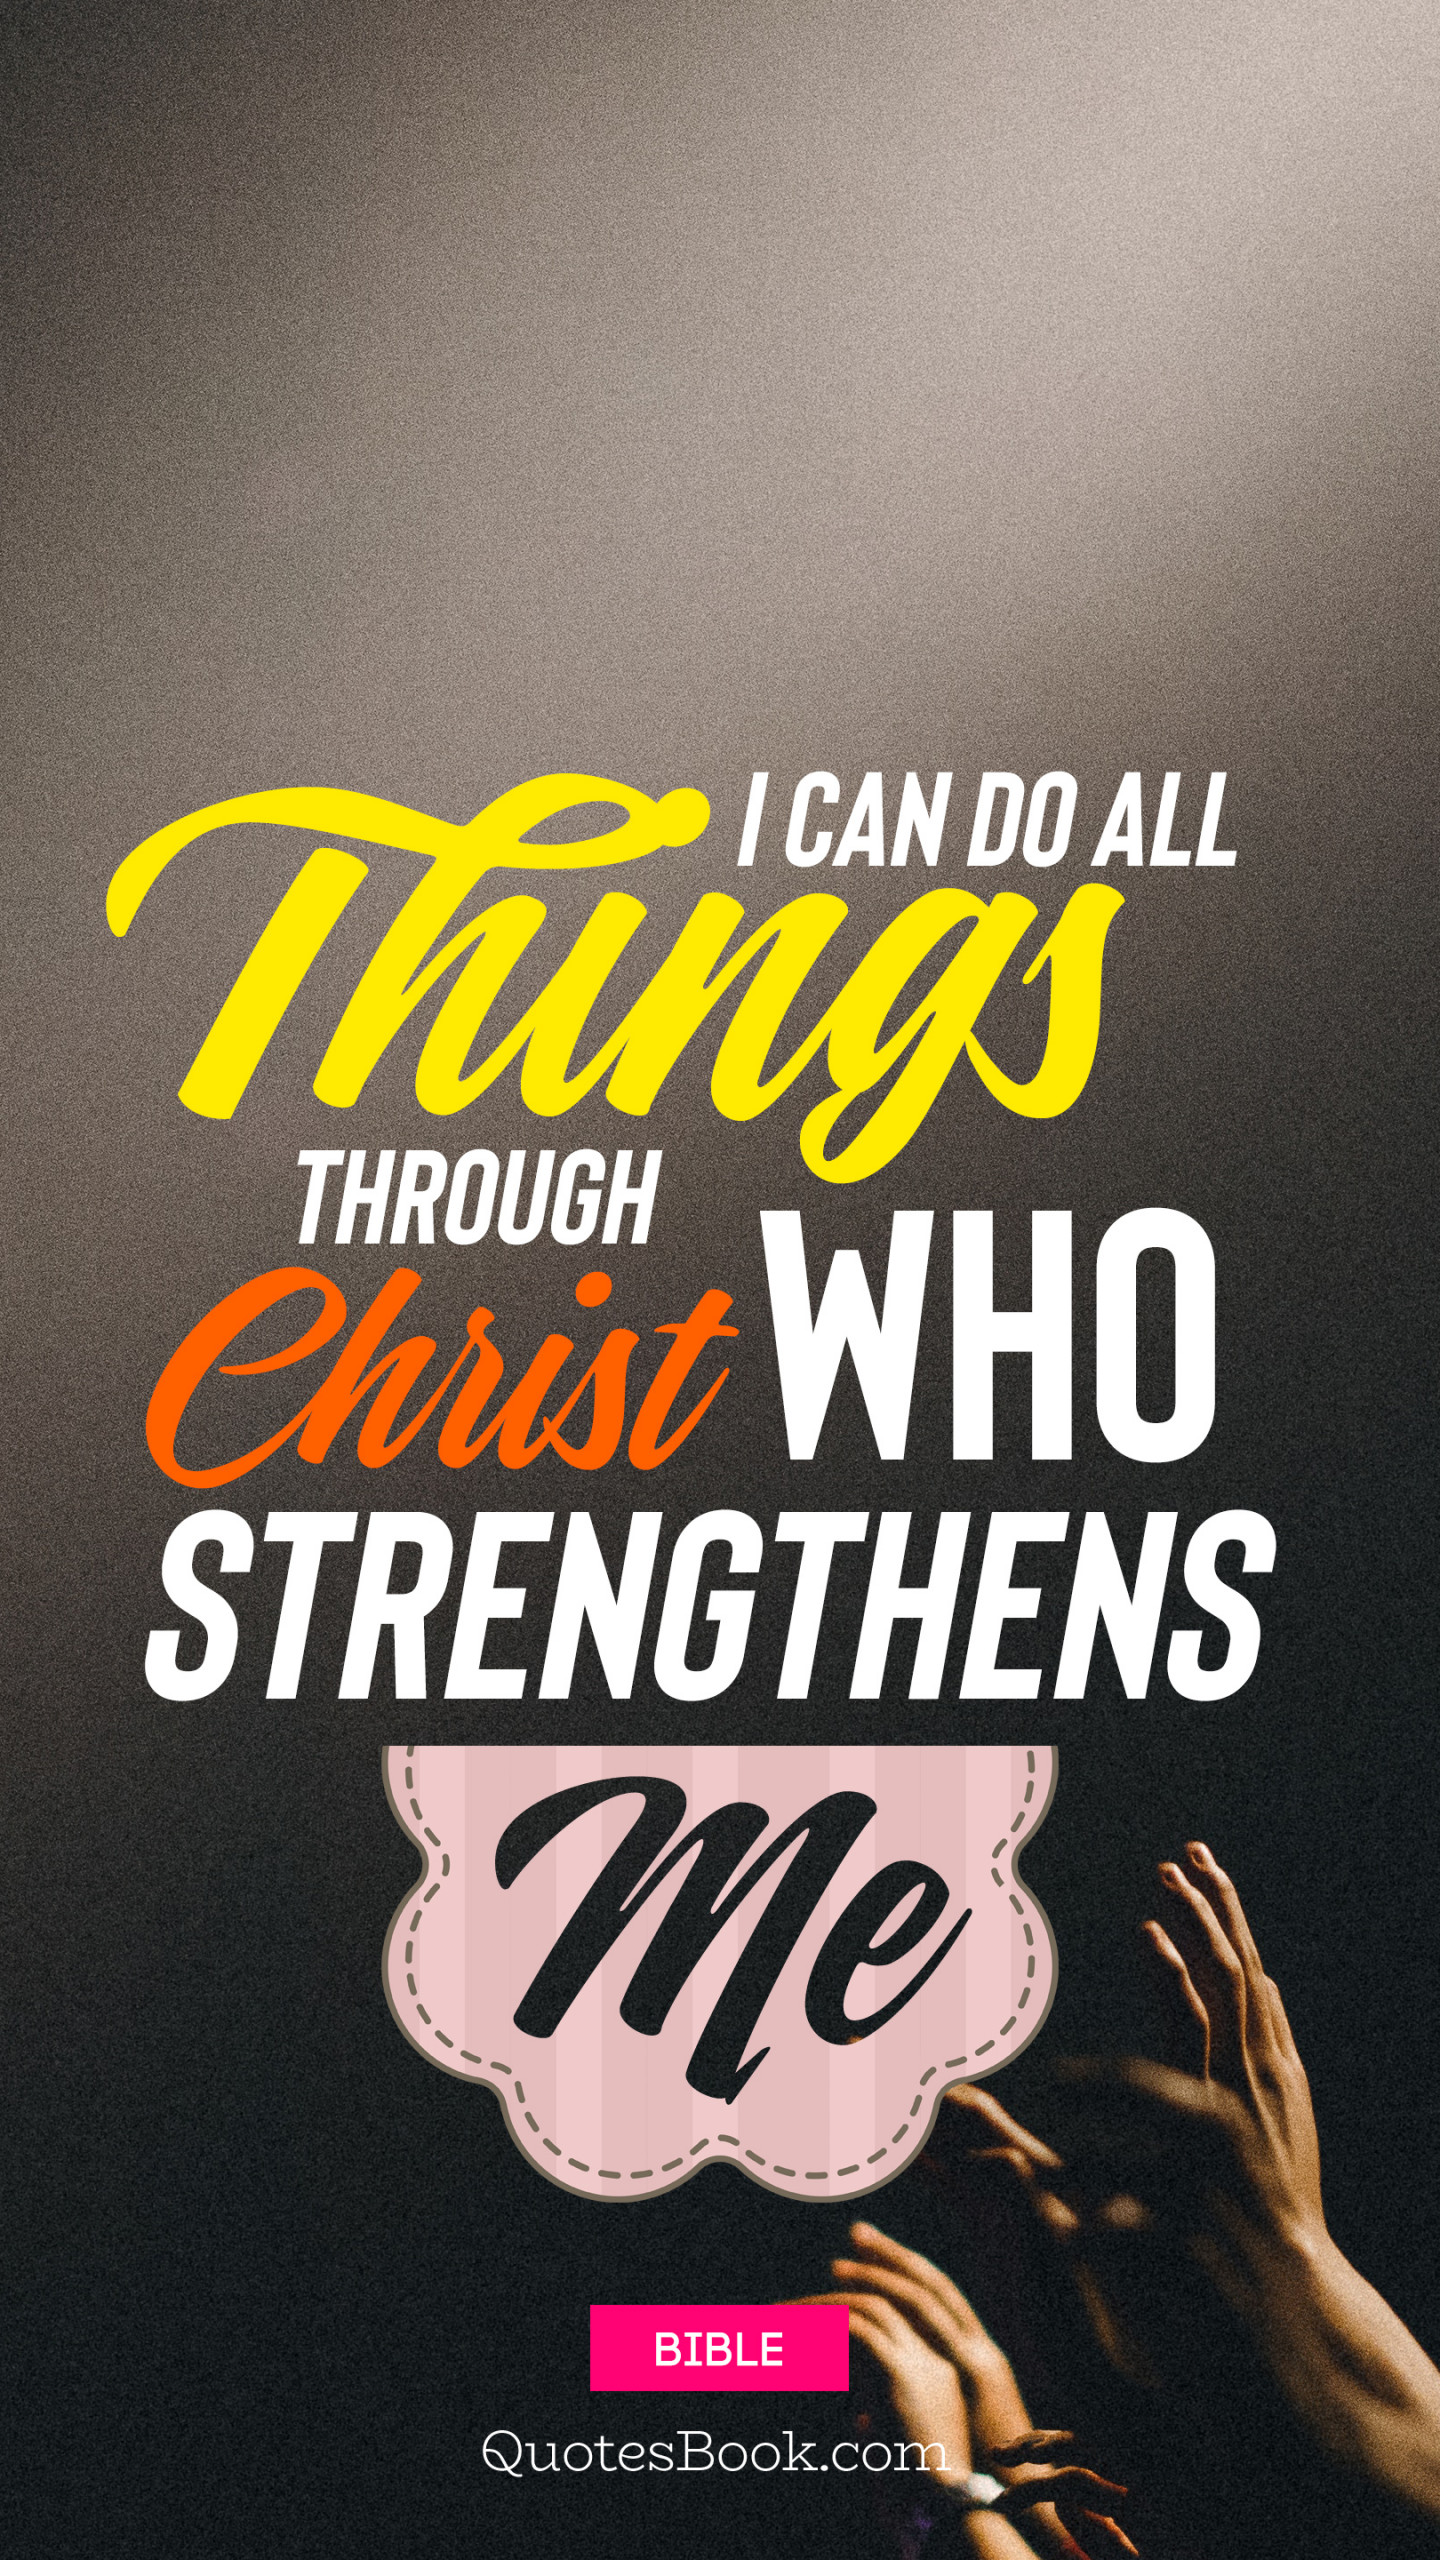 I can do all things through christ who strengthens me - QuotesBook